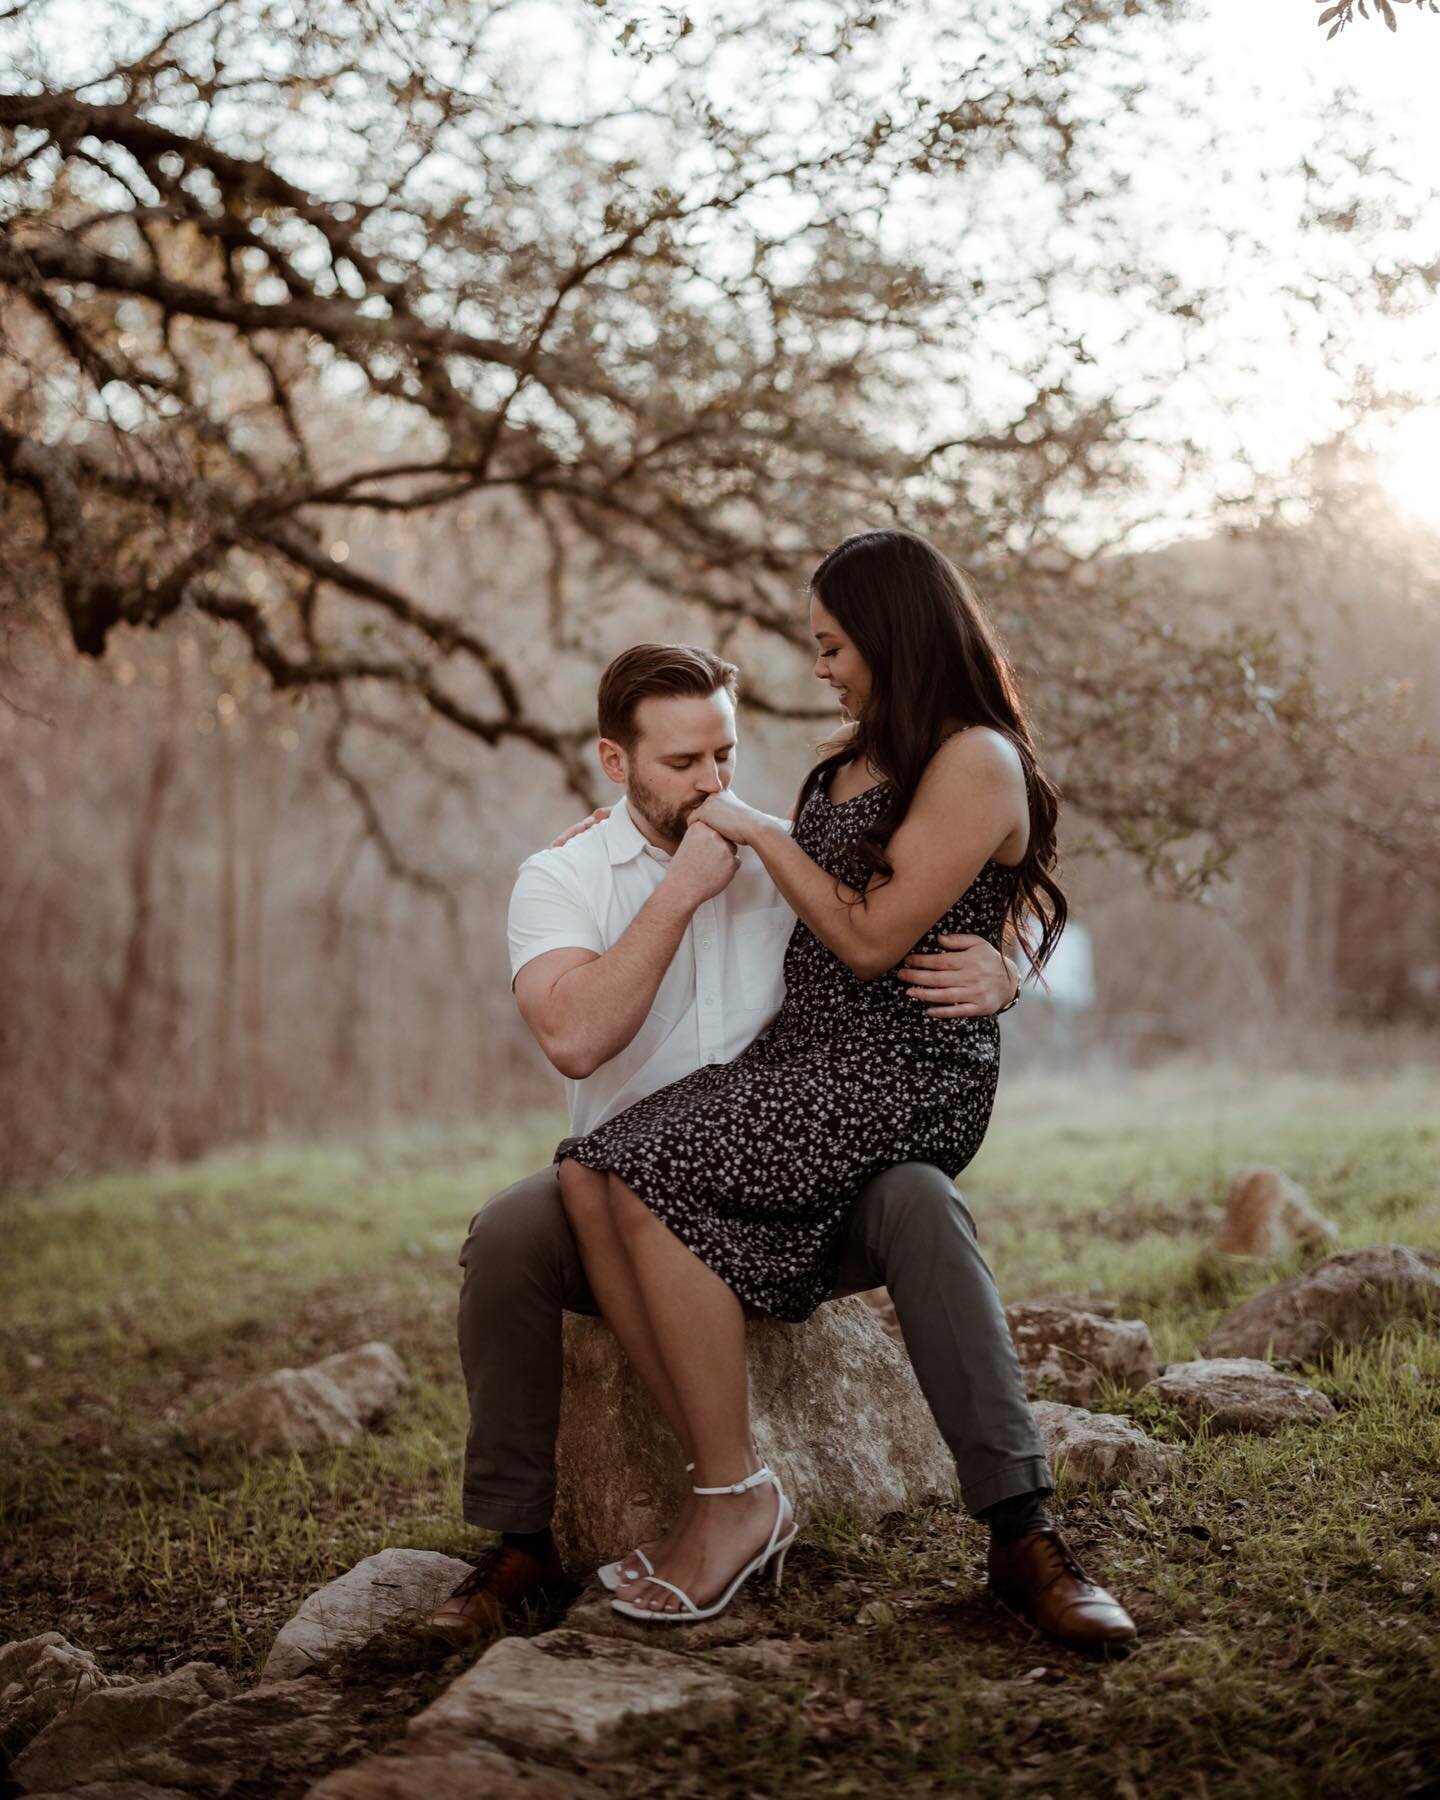 So glad we were able to capture Adrianna and Keith&rsquo;s precious engagement session before the freeze hit ❄️ thankfully we won&rsquo;t have to worry about the cold for their wedding this April 🌞